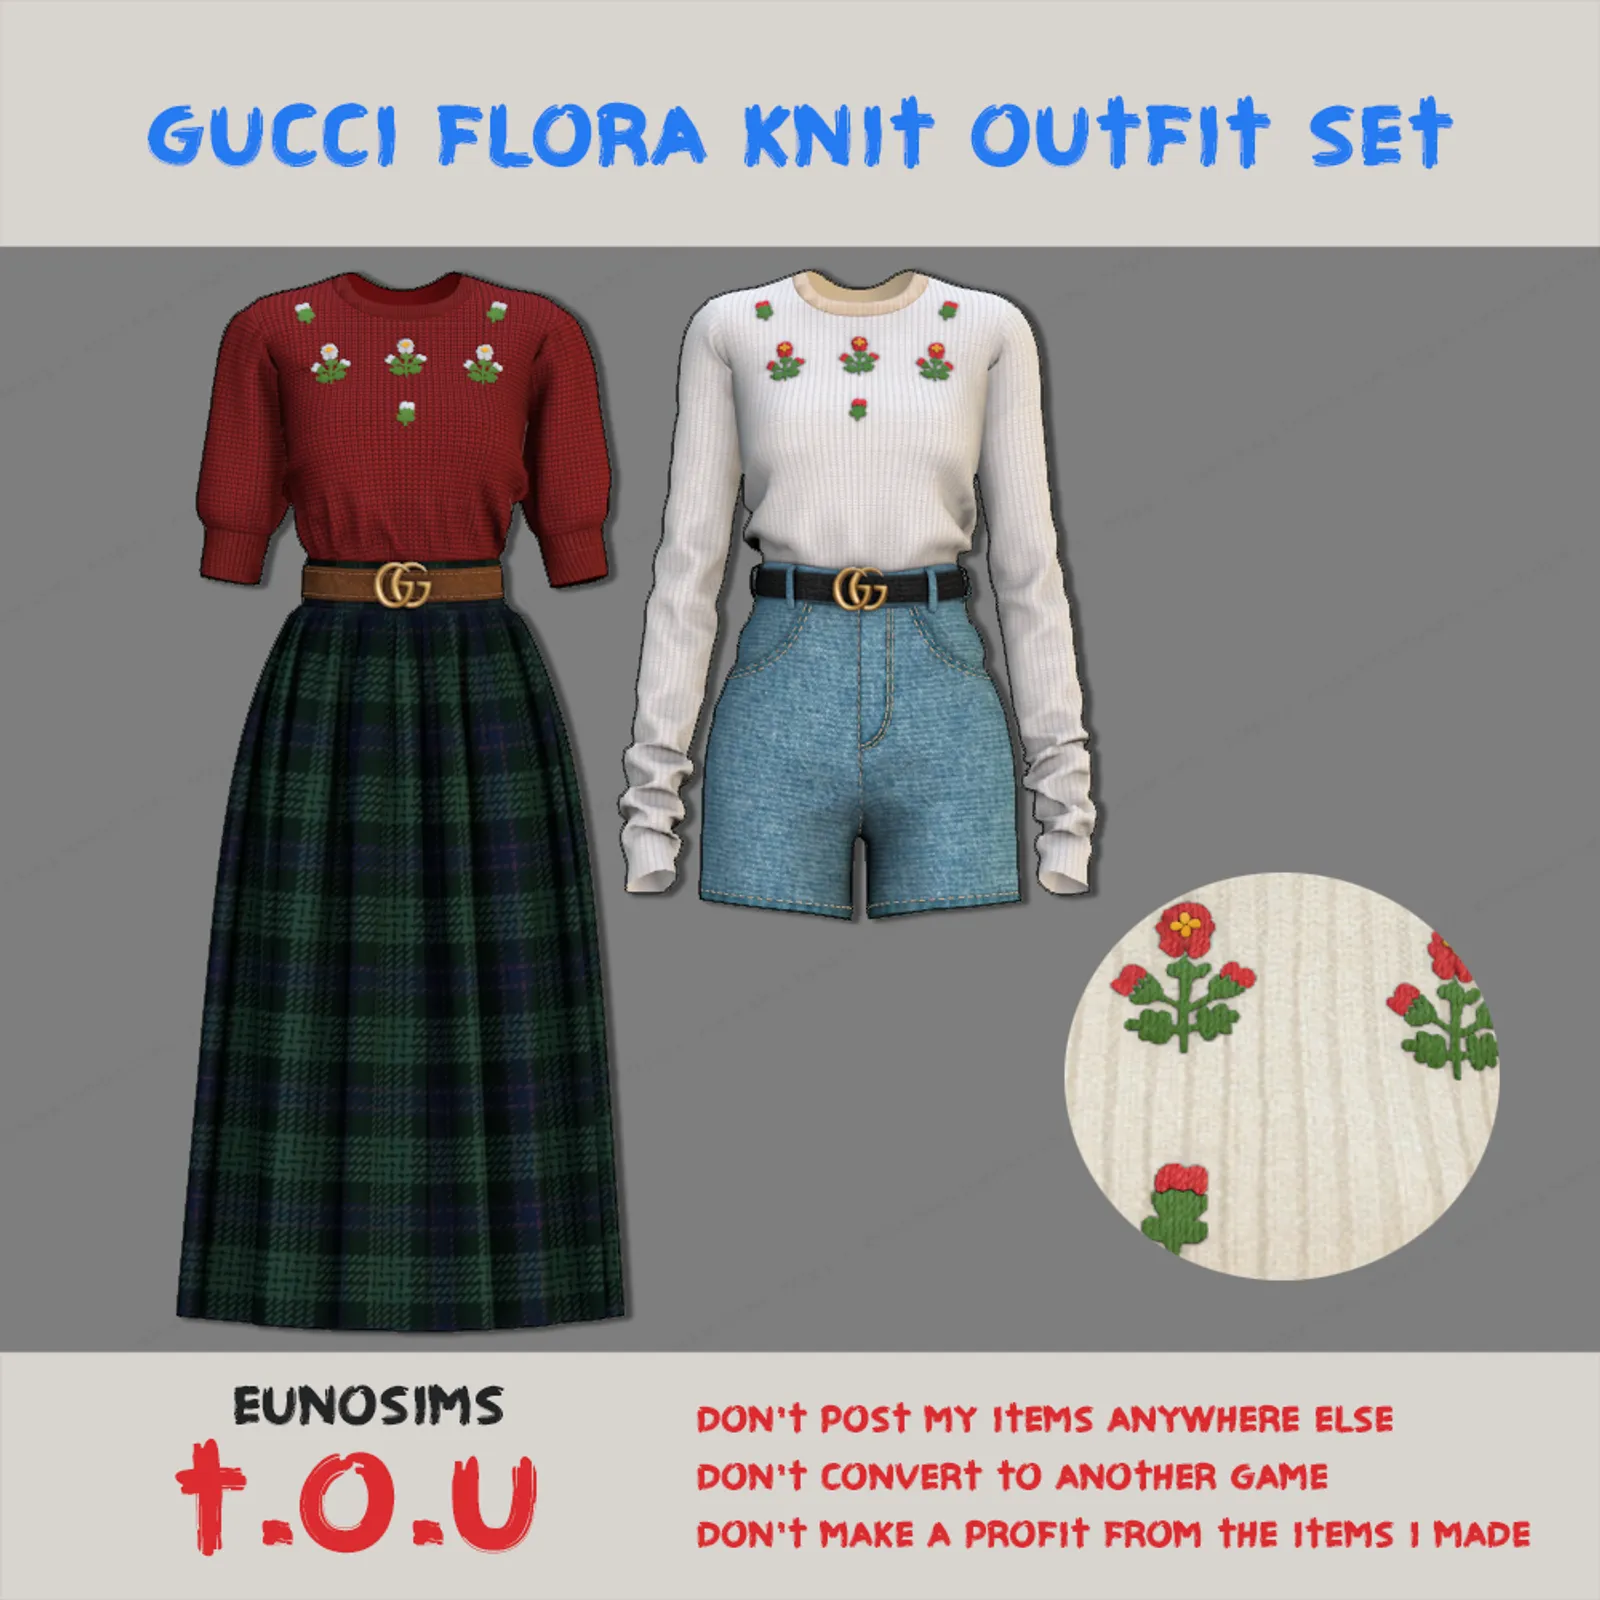 Gucci Flora knitwear outfit set